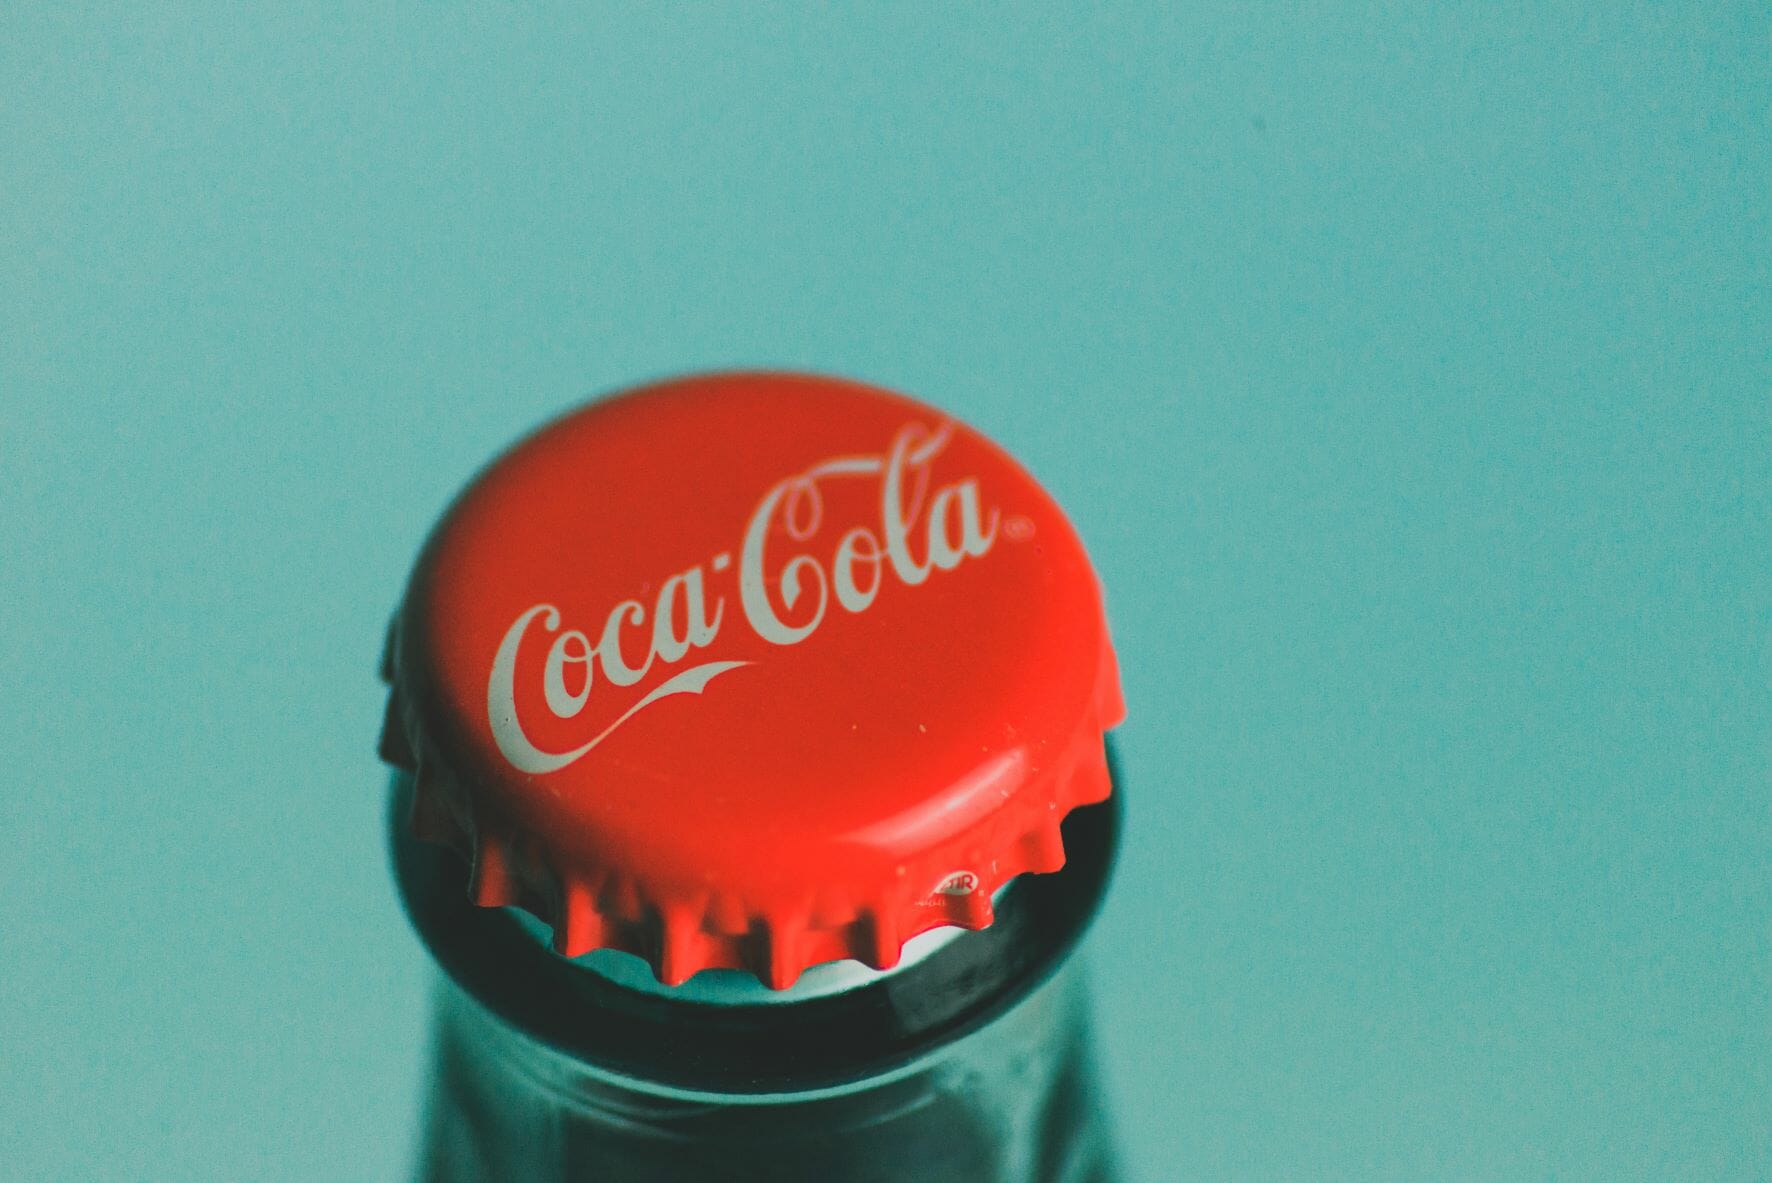 Coca-cola bottle cap - Developing Your Personal Brand